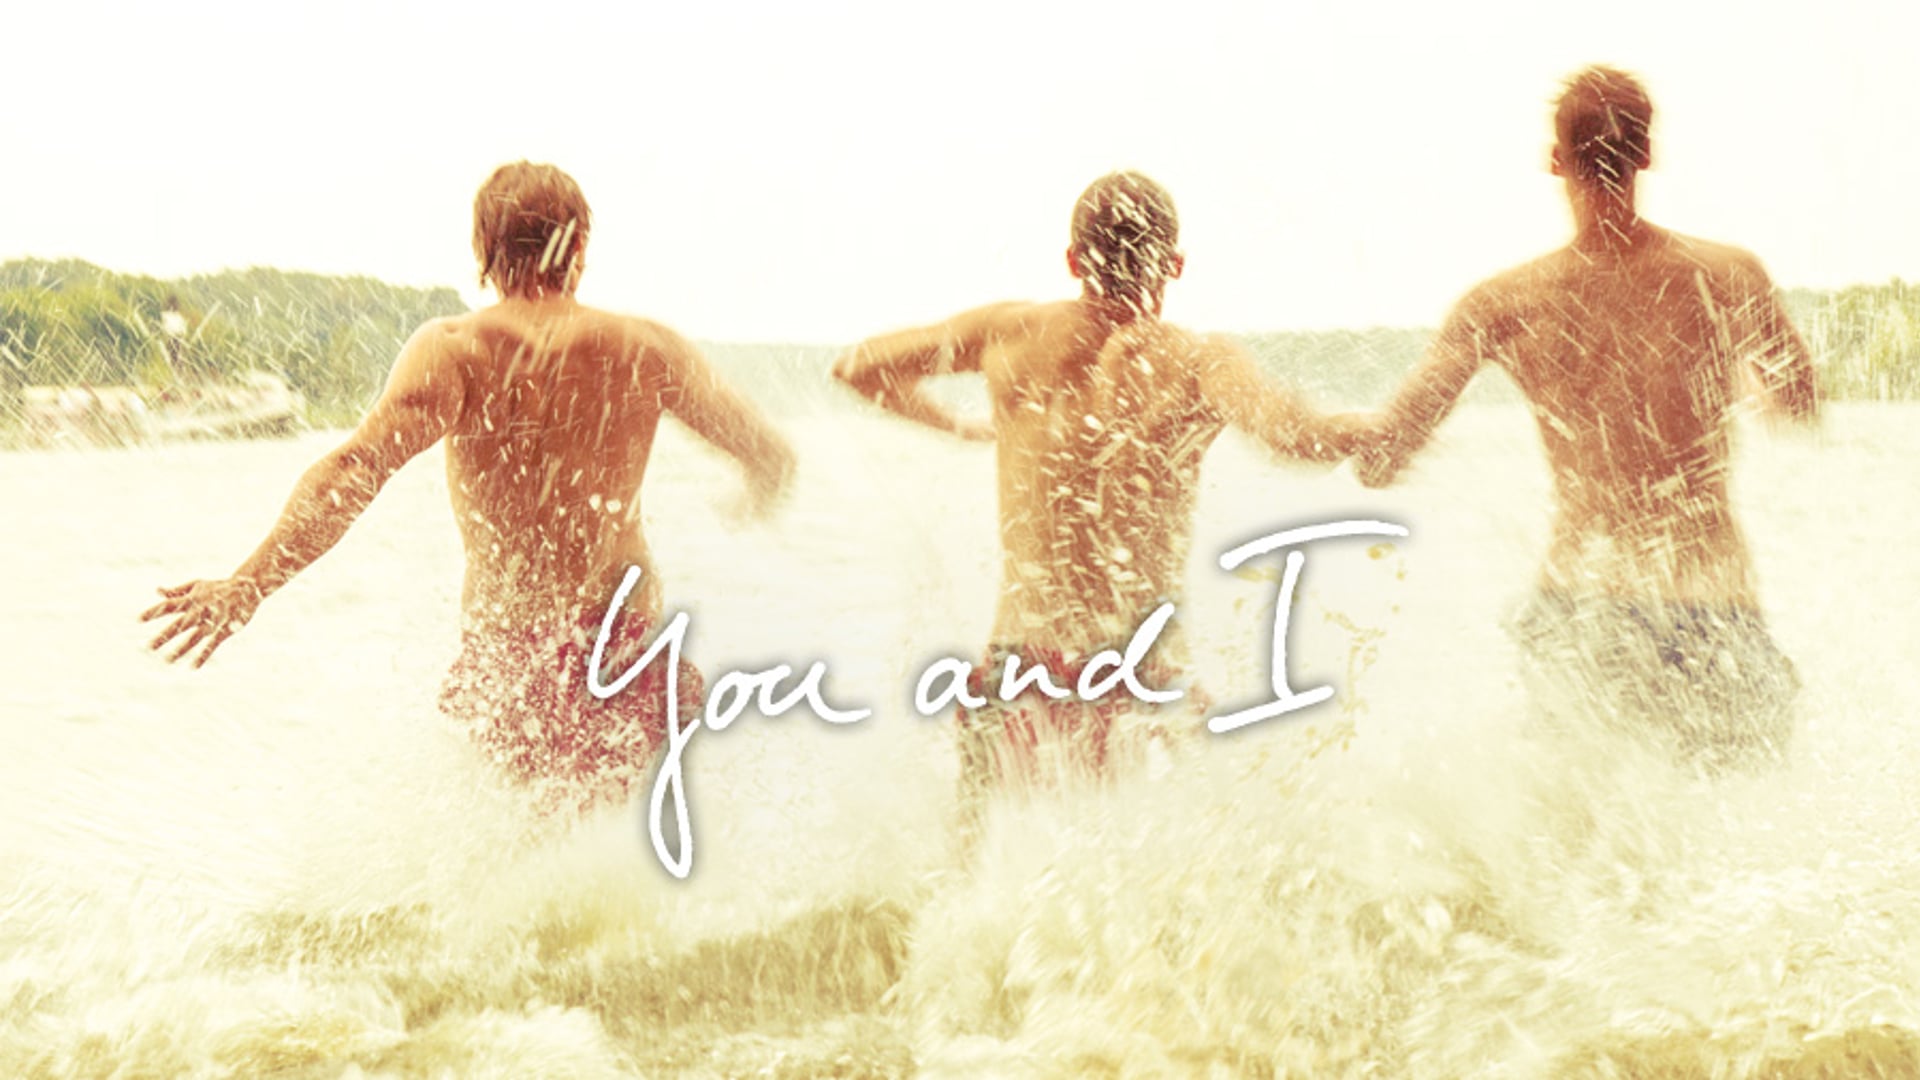 You and I (Trailer)